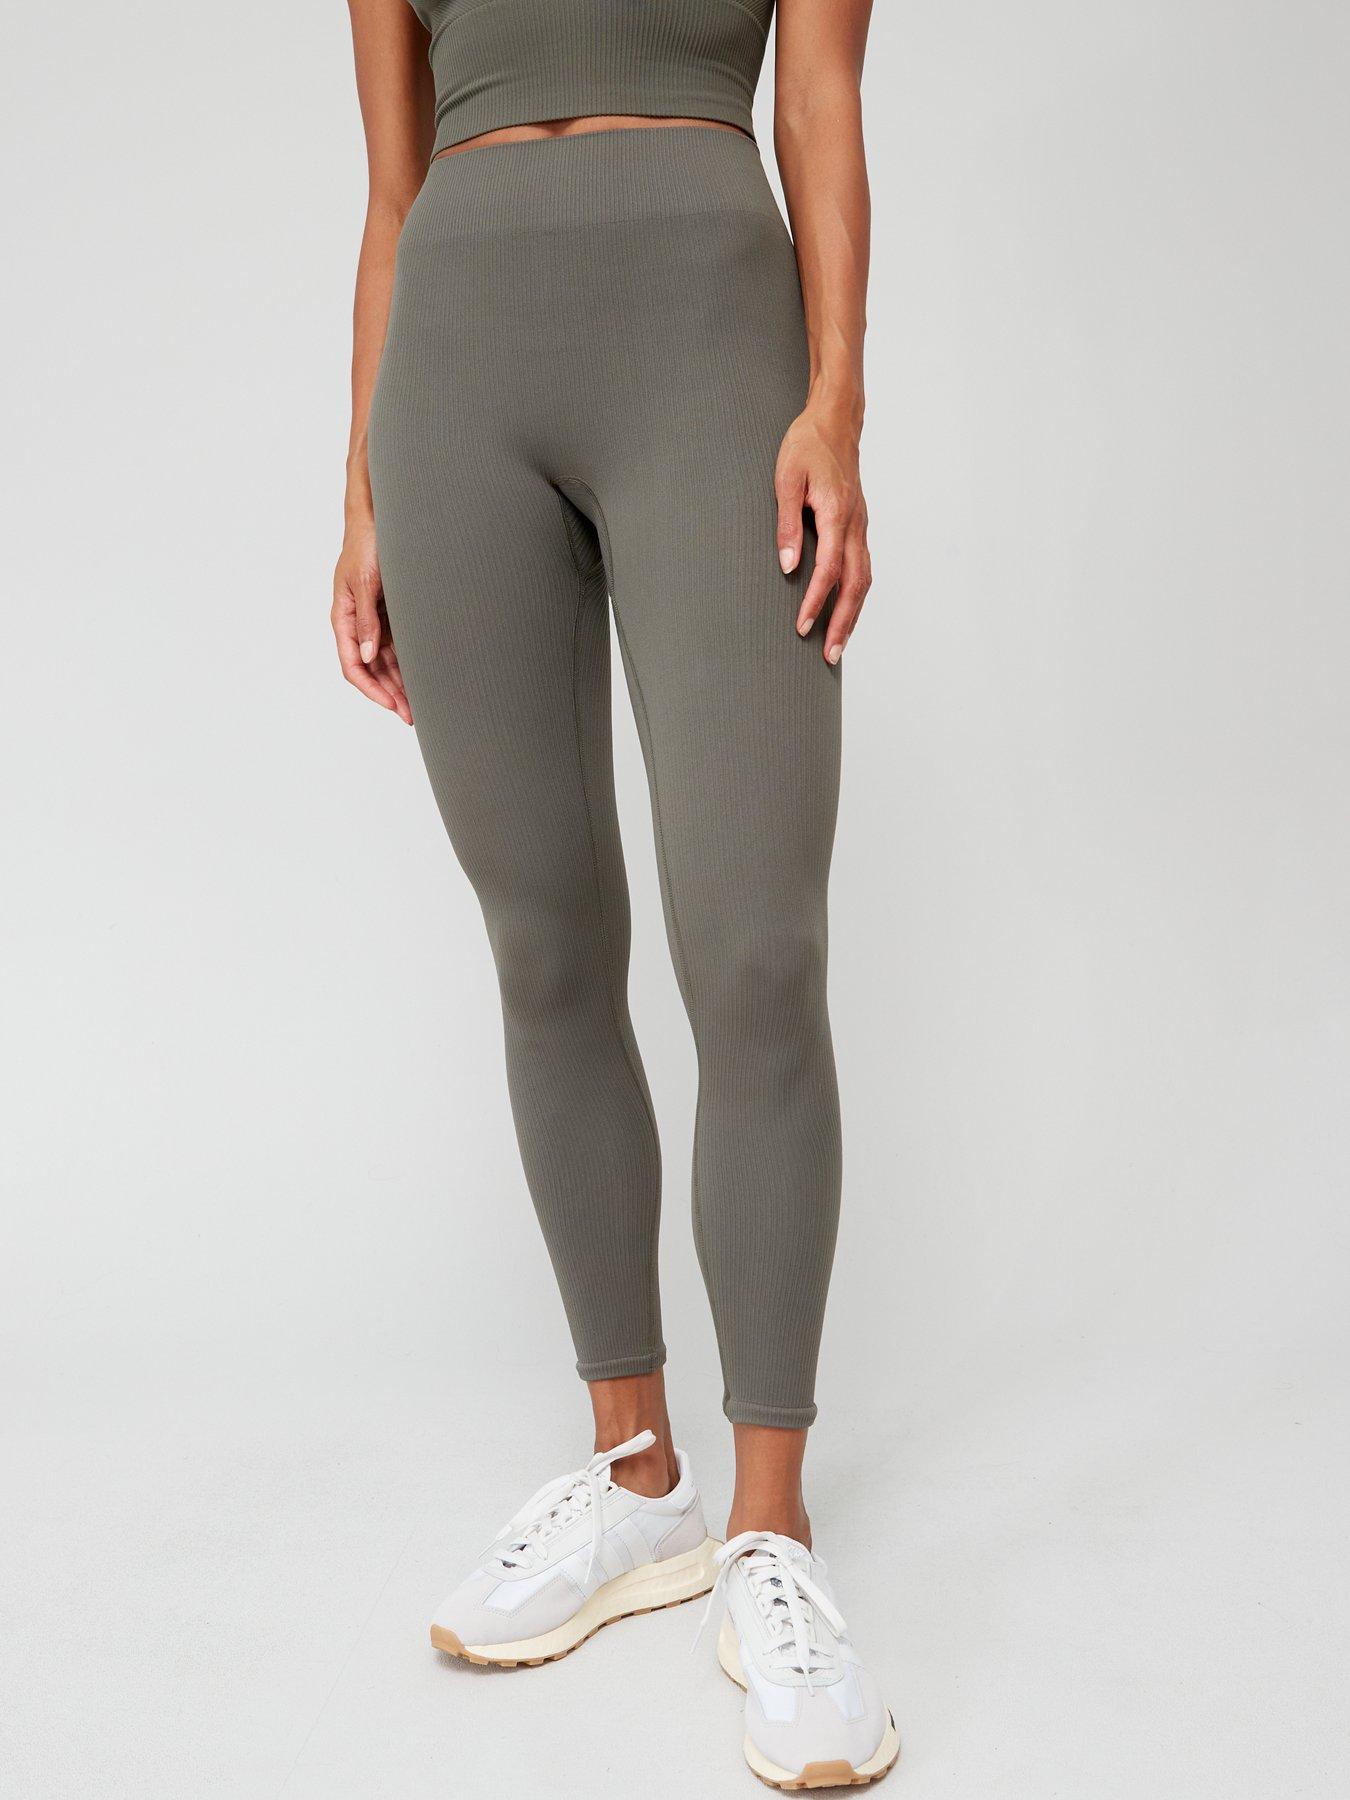 High Waisted Sculpt and Control Legging